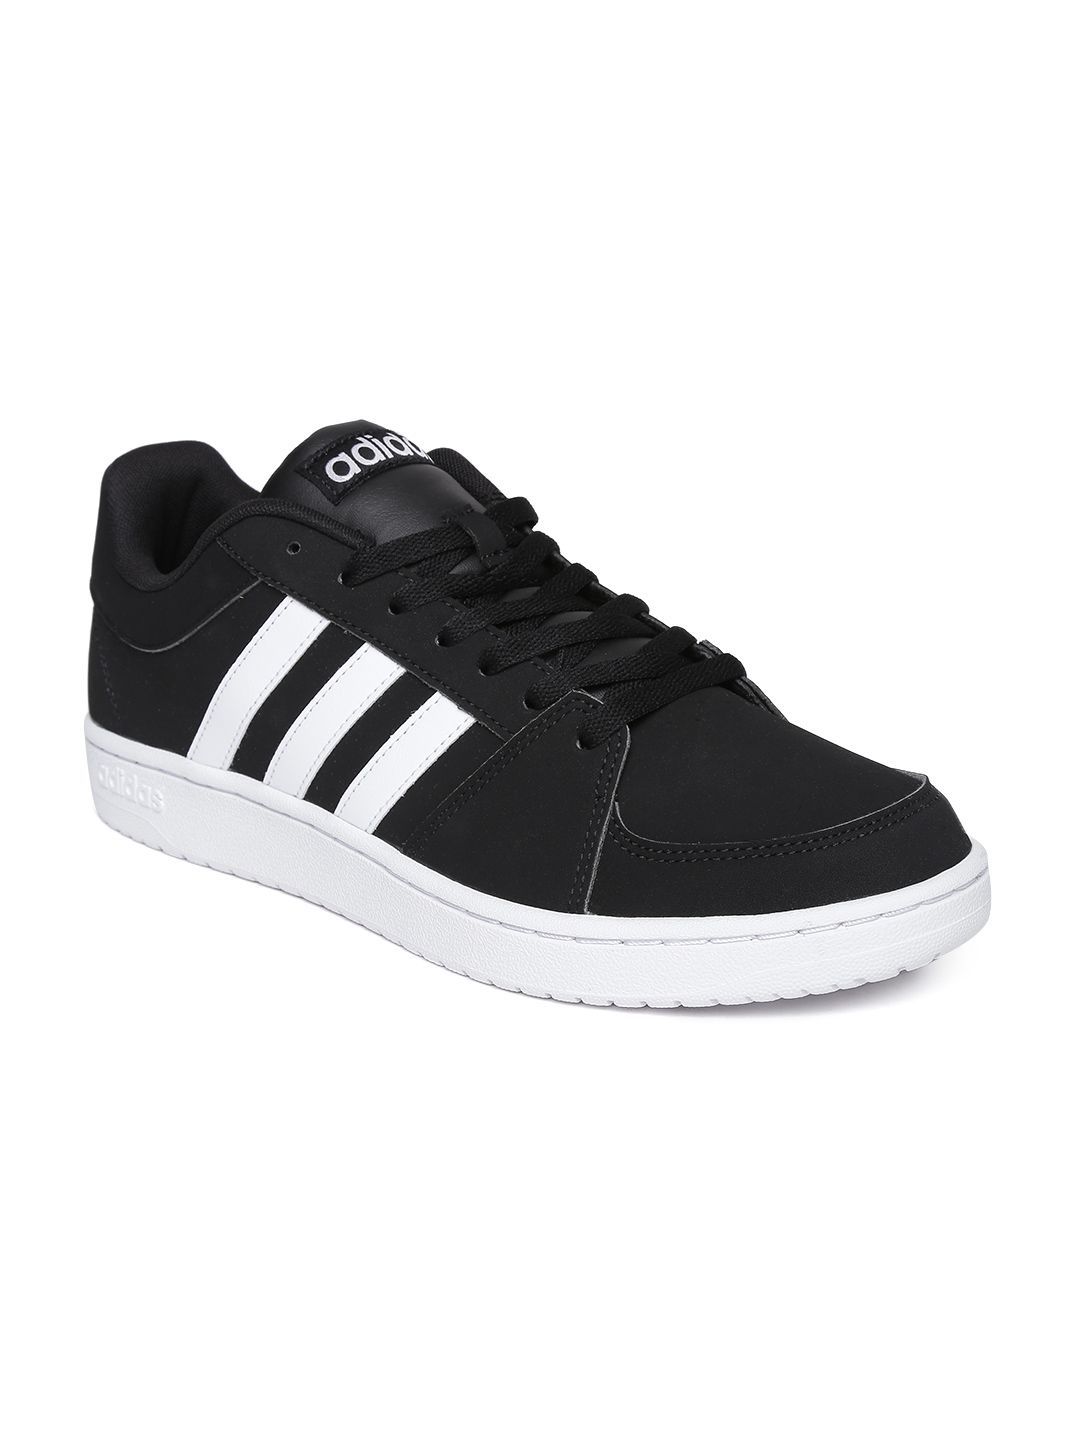 Adidas Neo Sneakers Black Casual Shoes - Buy Adidas Neo Sneakers Black ...